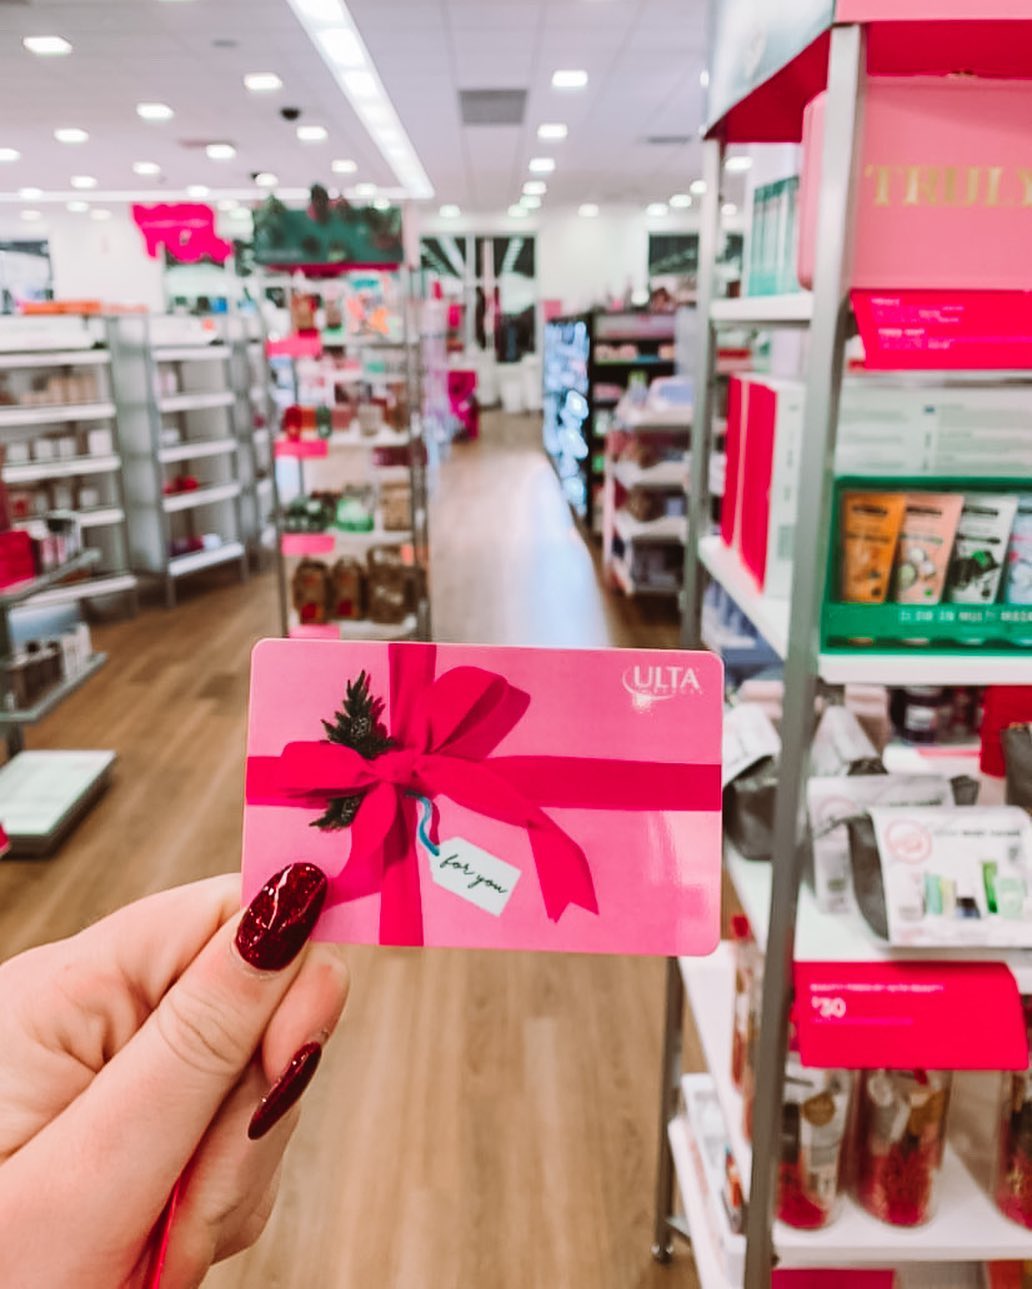 65 Best Gift Card Ideas for All Types of People (2022 Gifts)